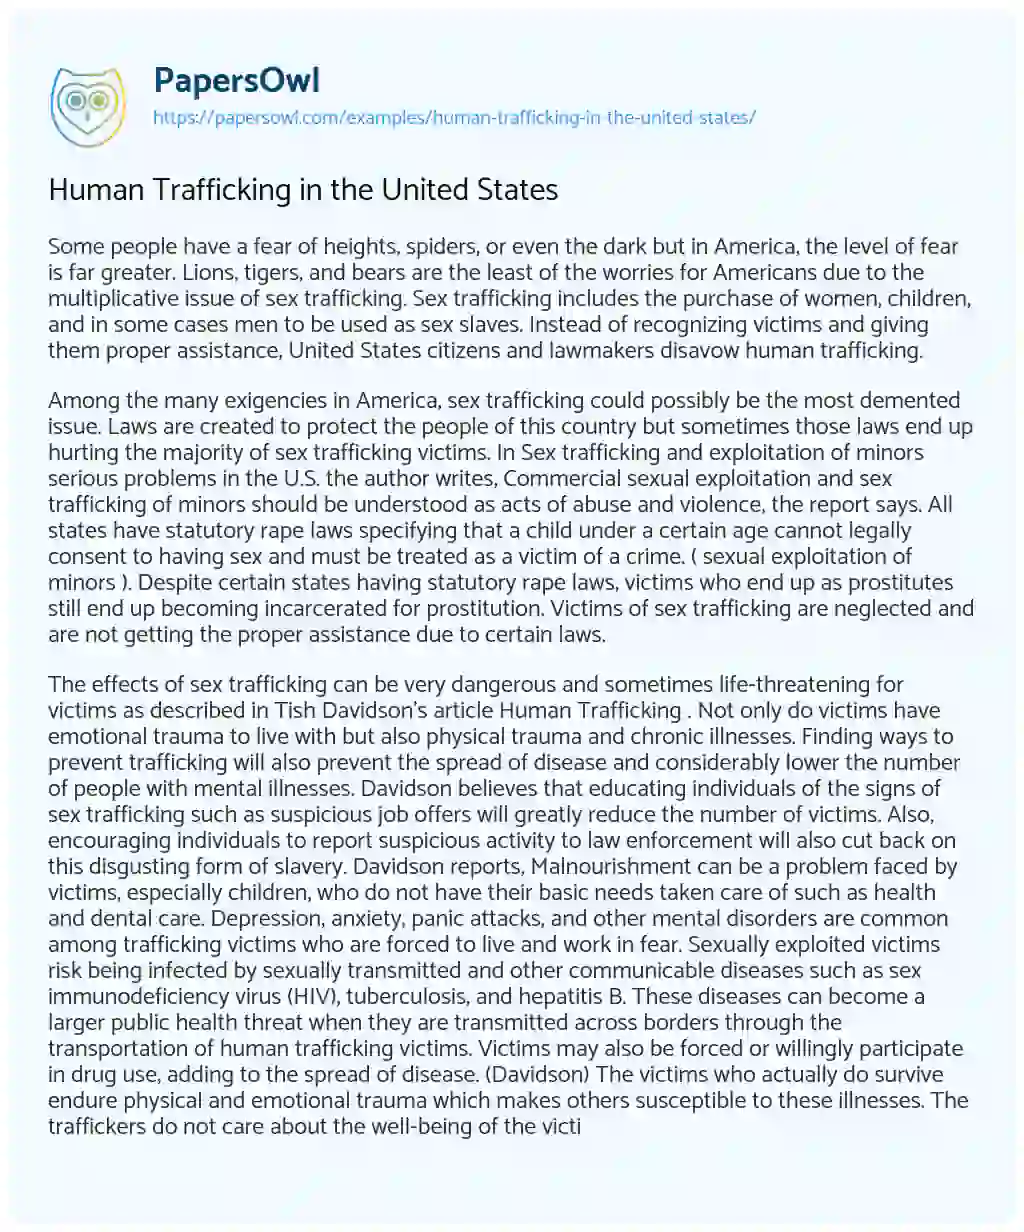 persuasive essay about human trafficking